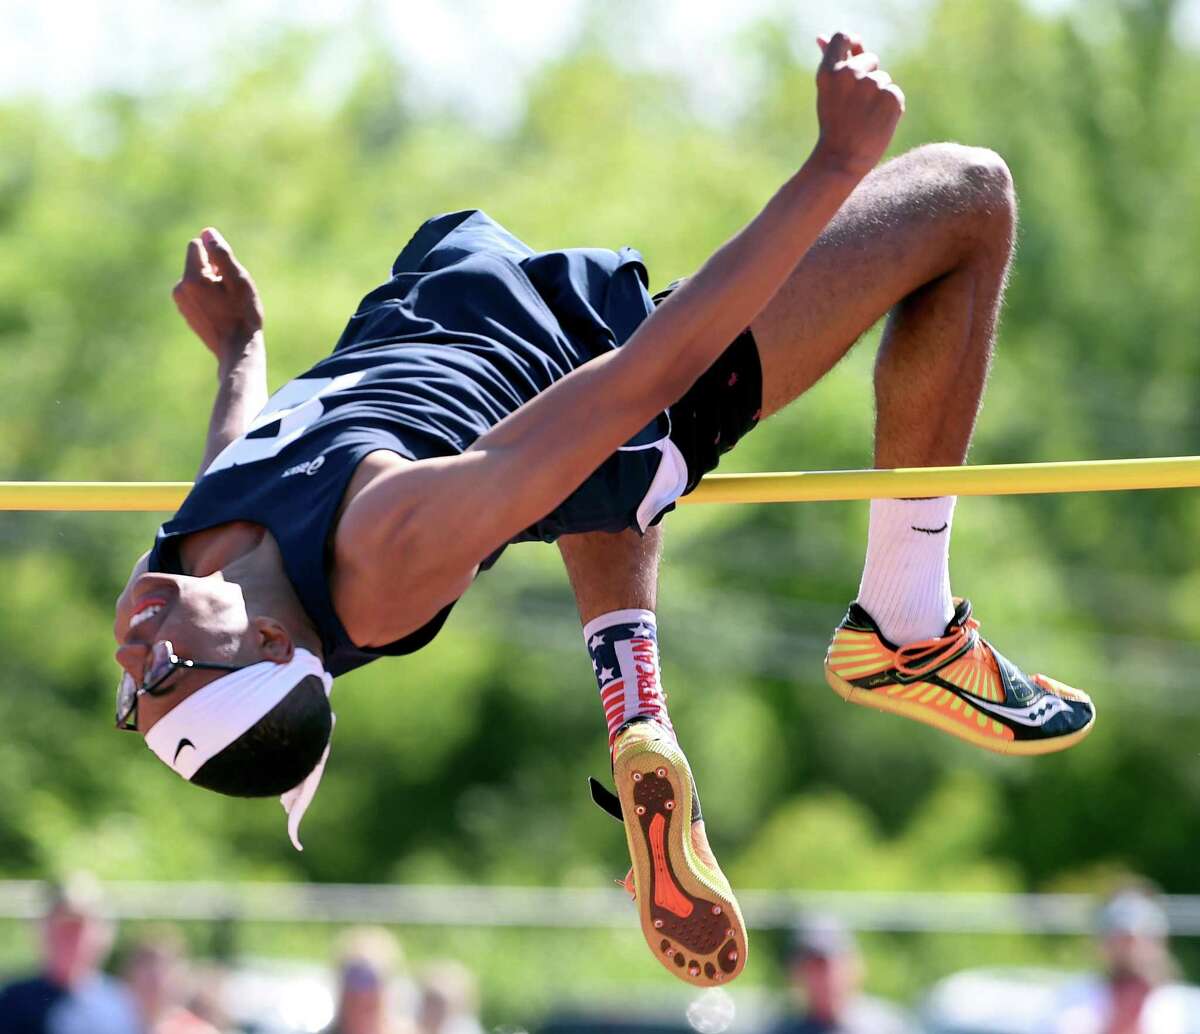 Staples’ Chet Ellis set a state record in the high jump at the State Open on Monday.